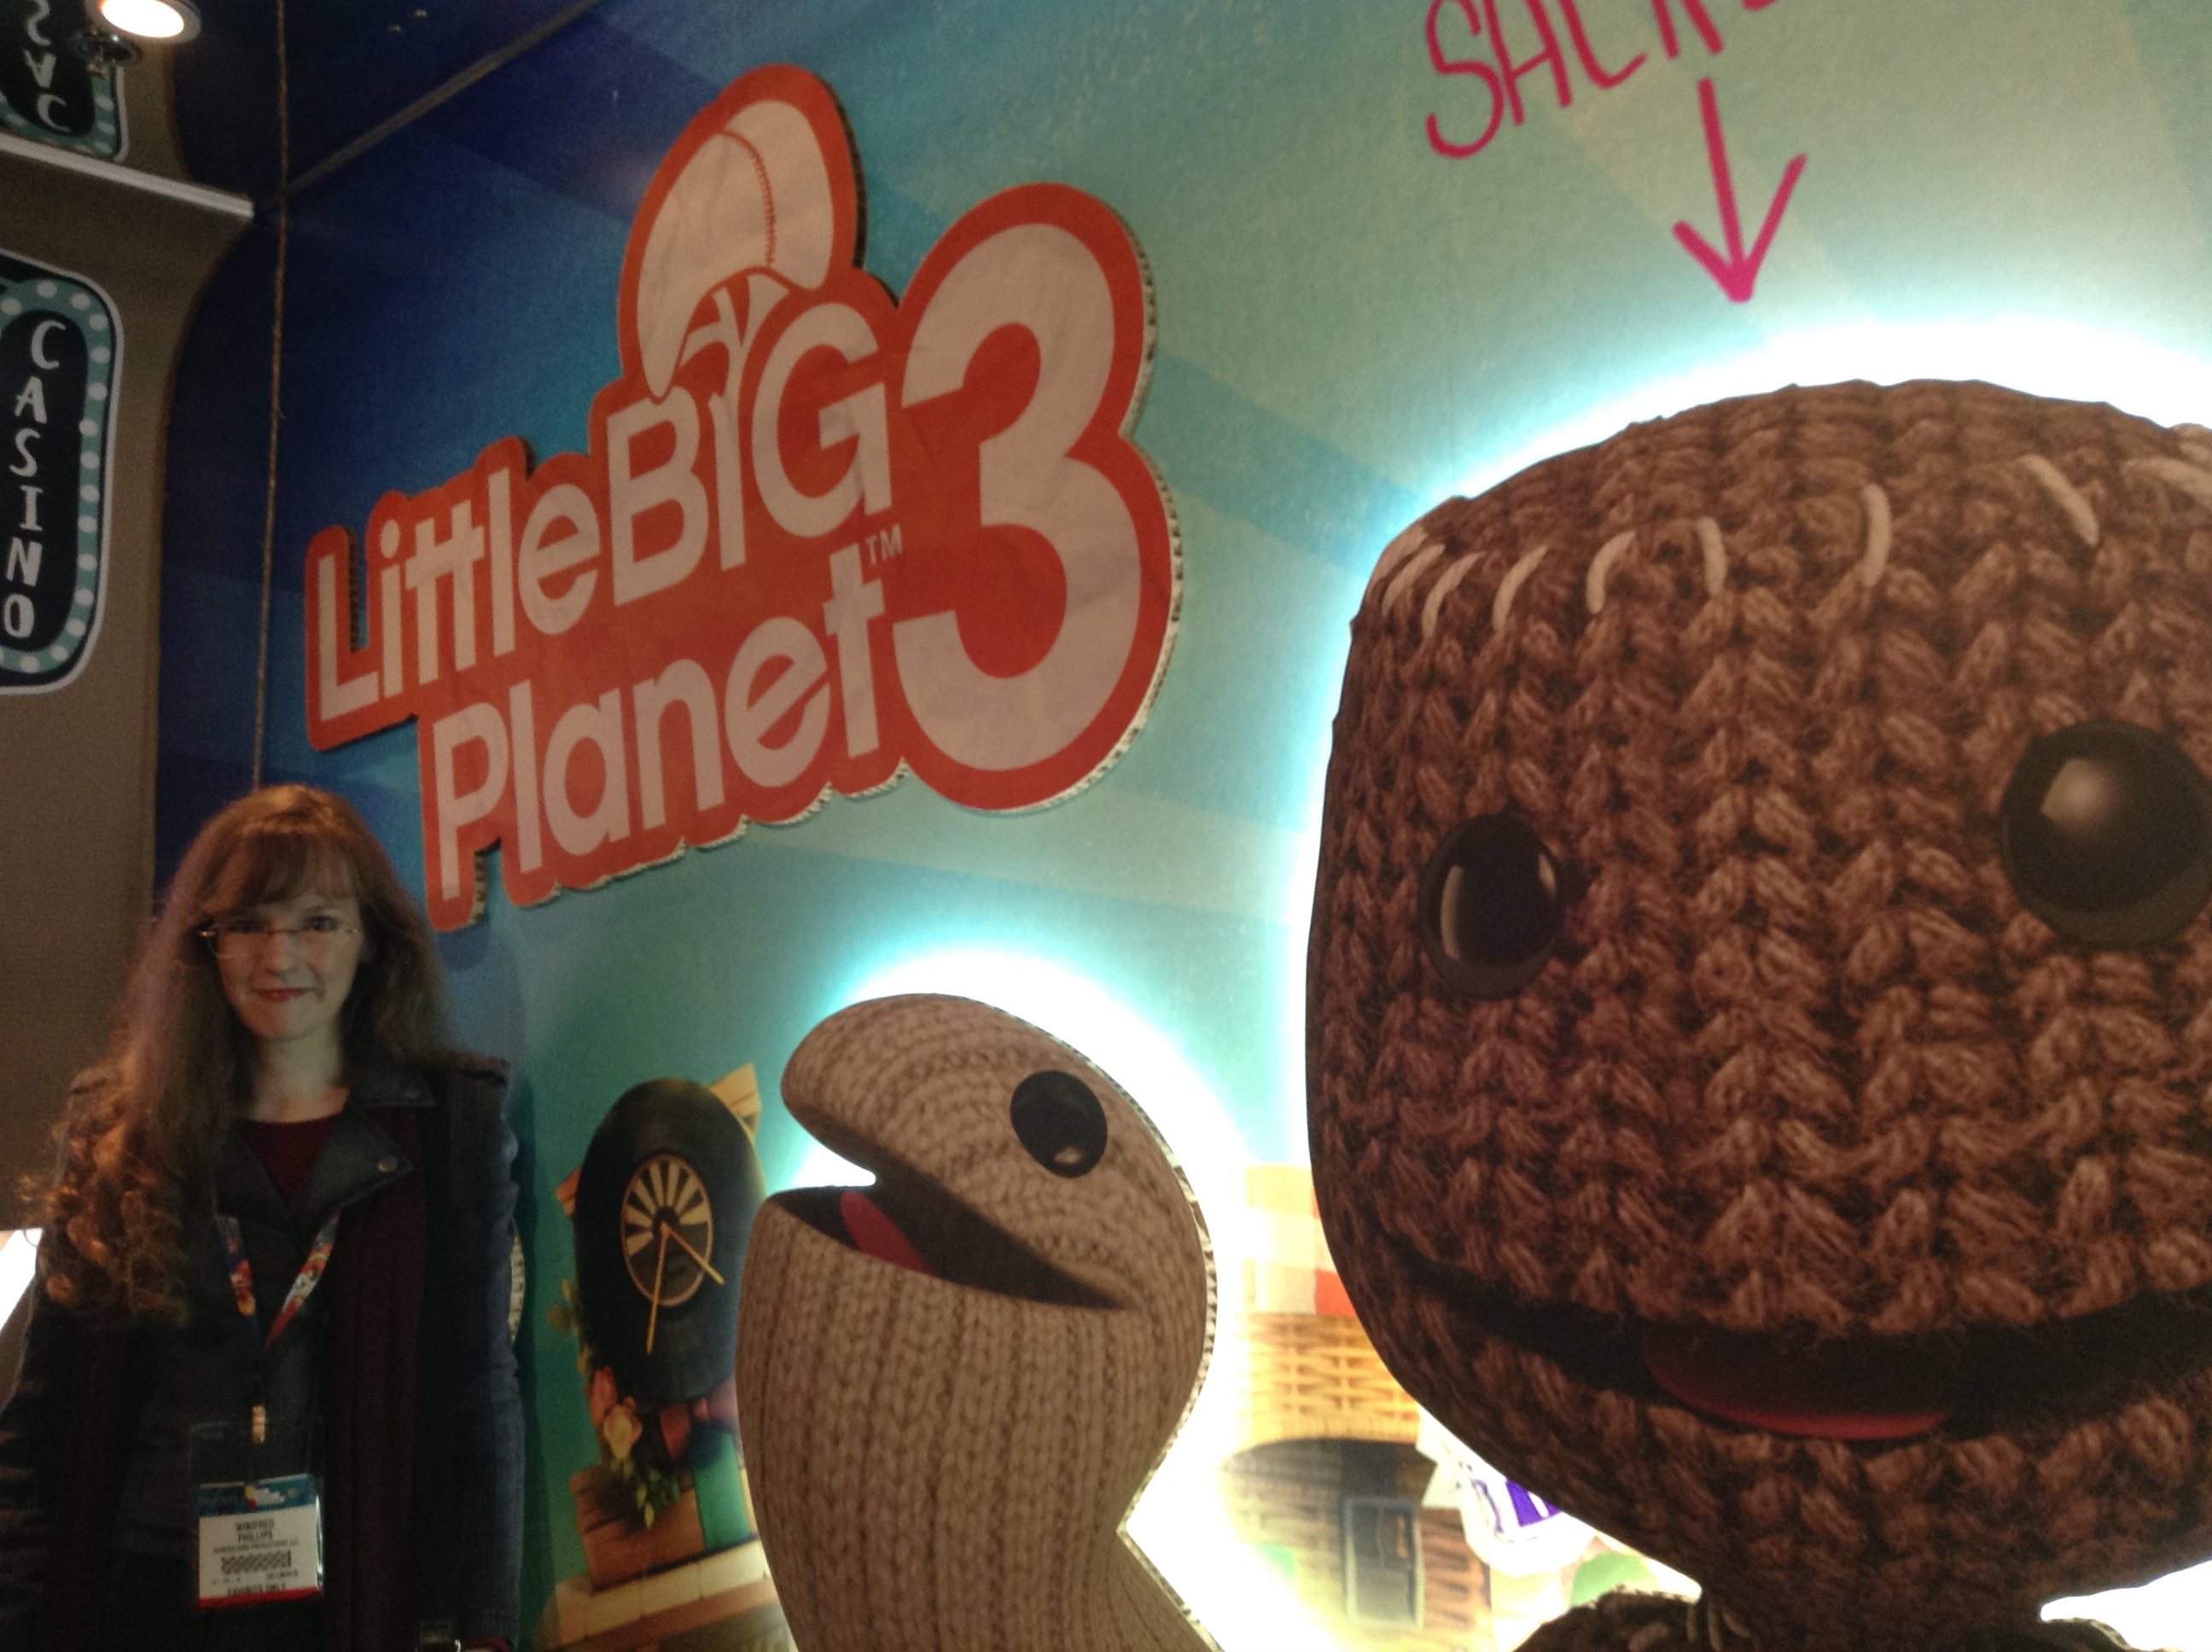 Photo of composer Winifred Phillips taken in the LittleBigPlanet 3 booth at the Electronic Entertainment Expo 2014.